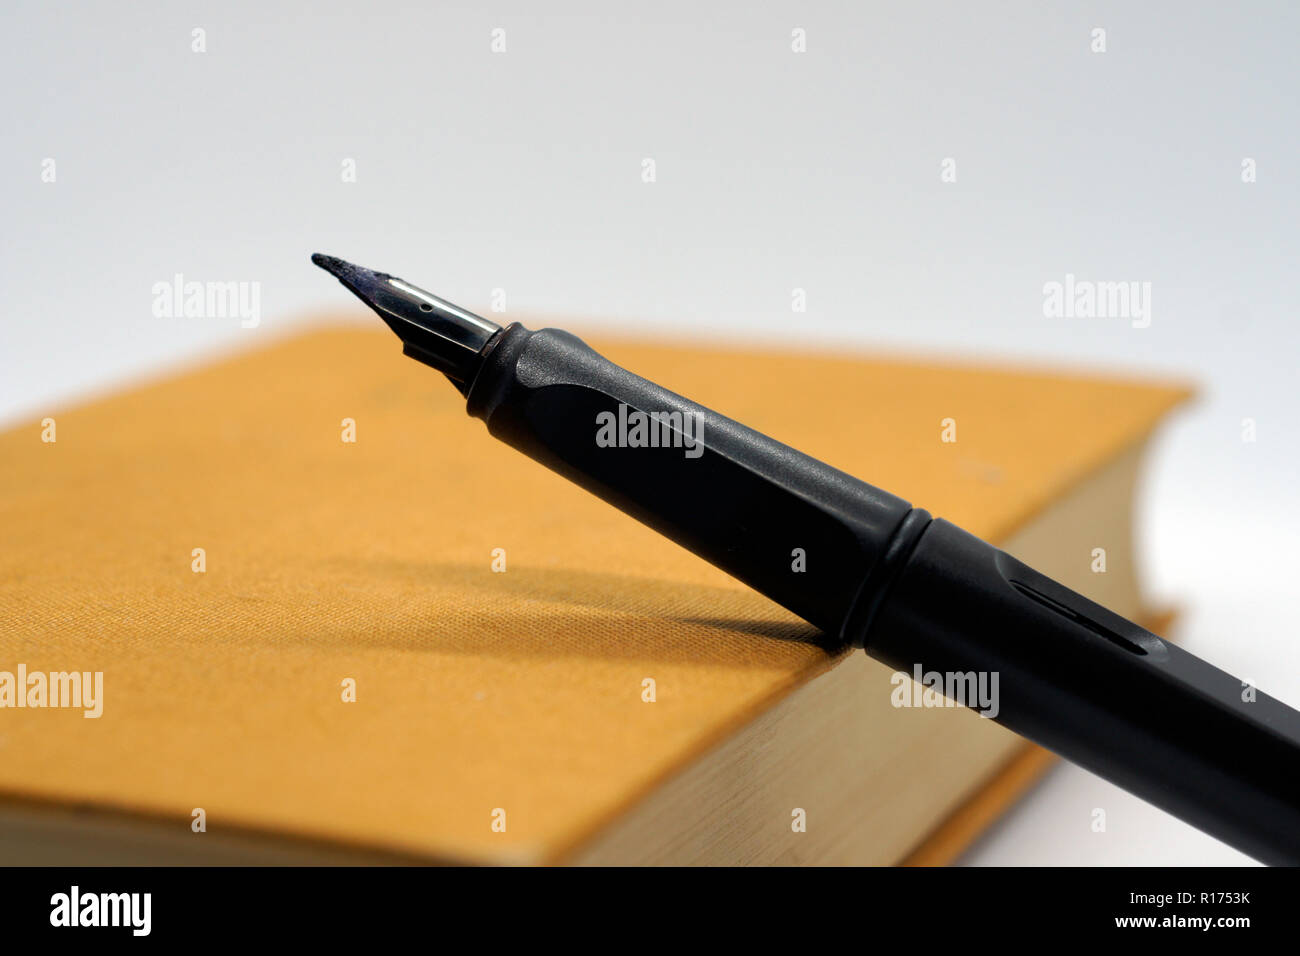 black pen at brown hard covered book Stock Photo